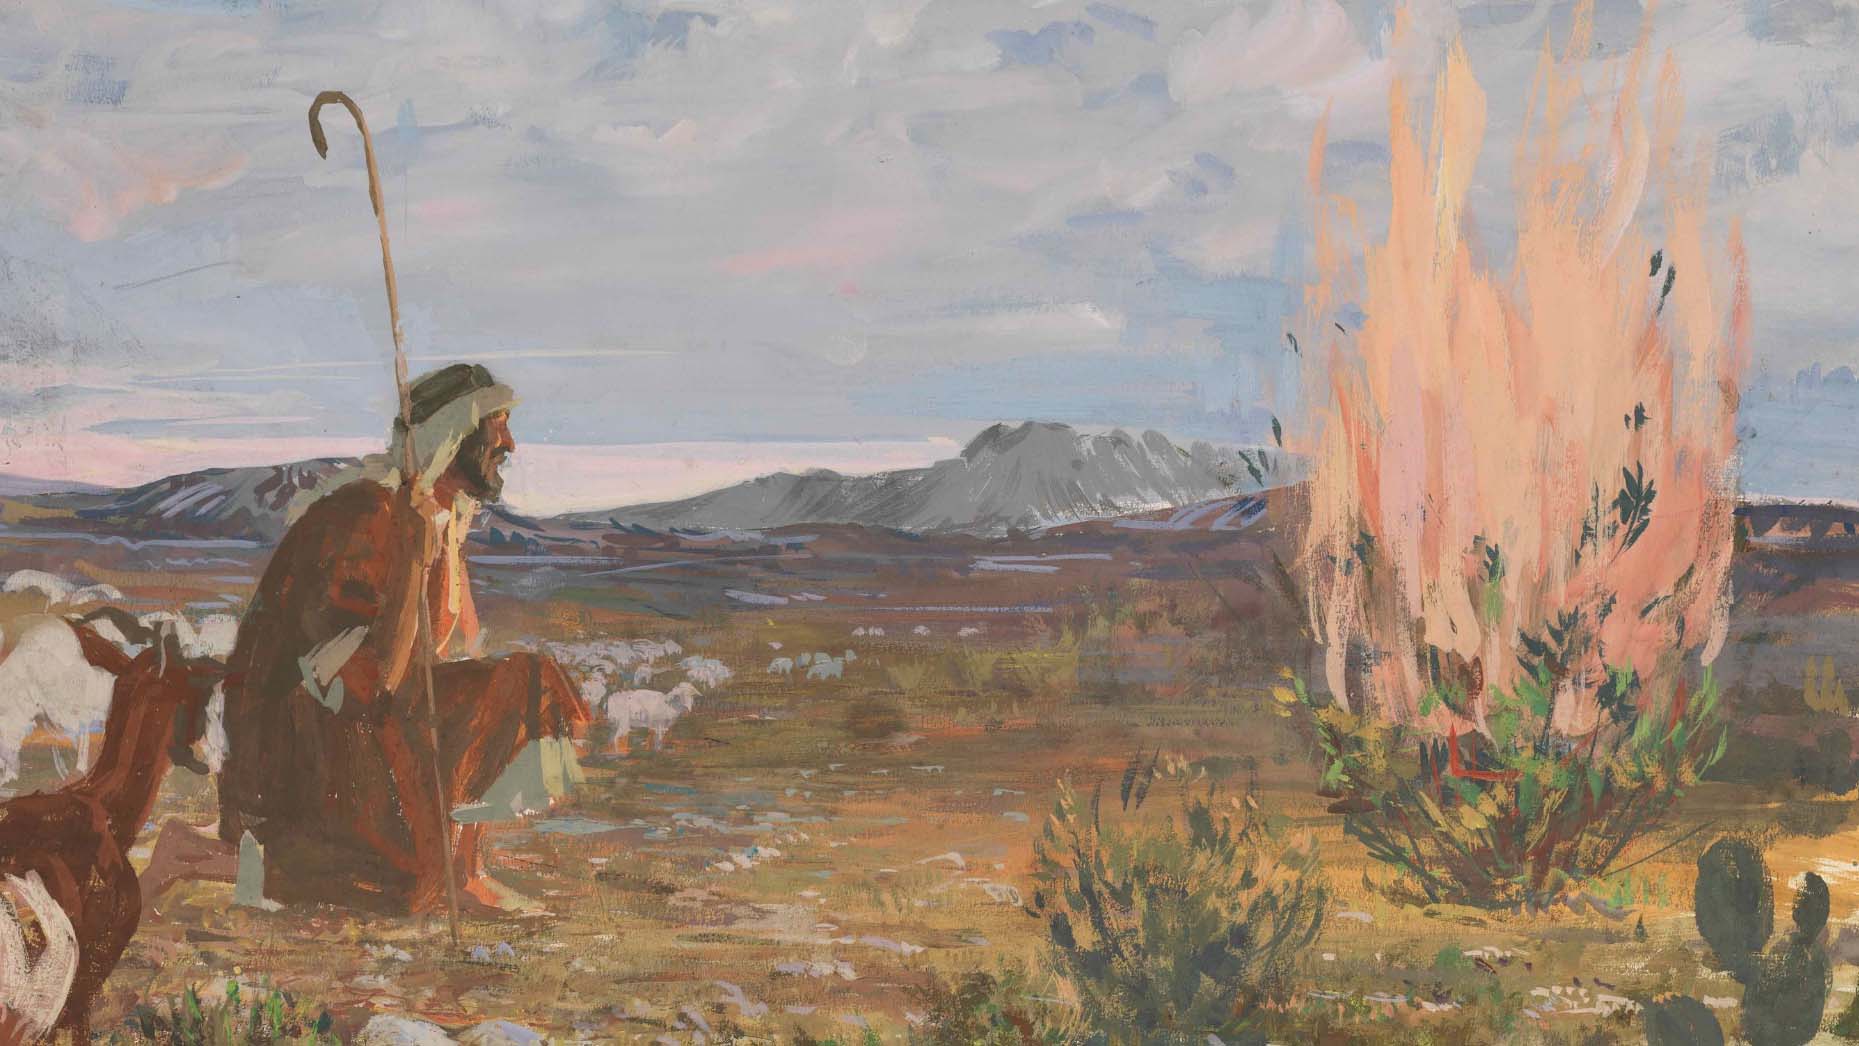 Moses and the Burning Bush, by Harry Anderson. Image via Church of Jesus Christ.